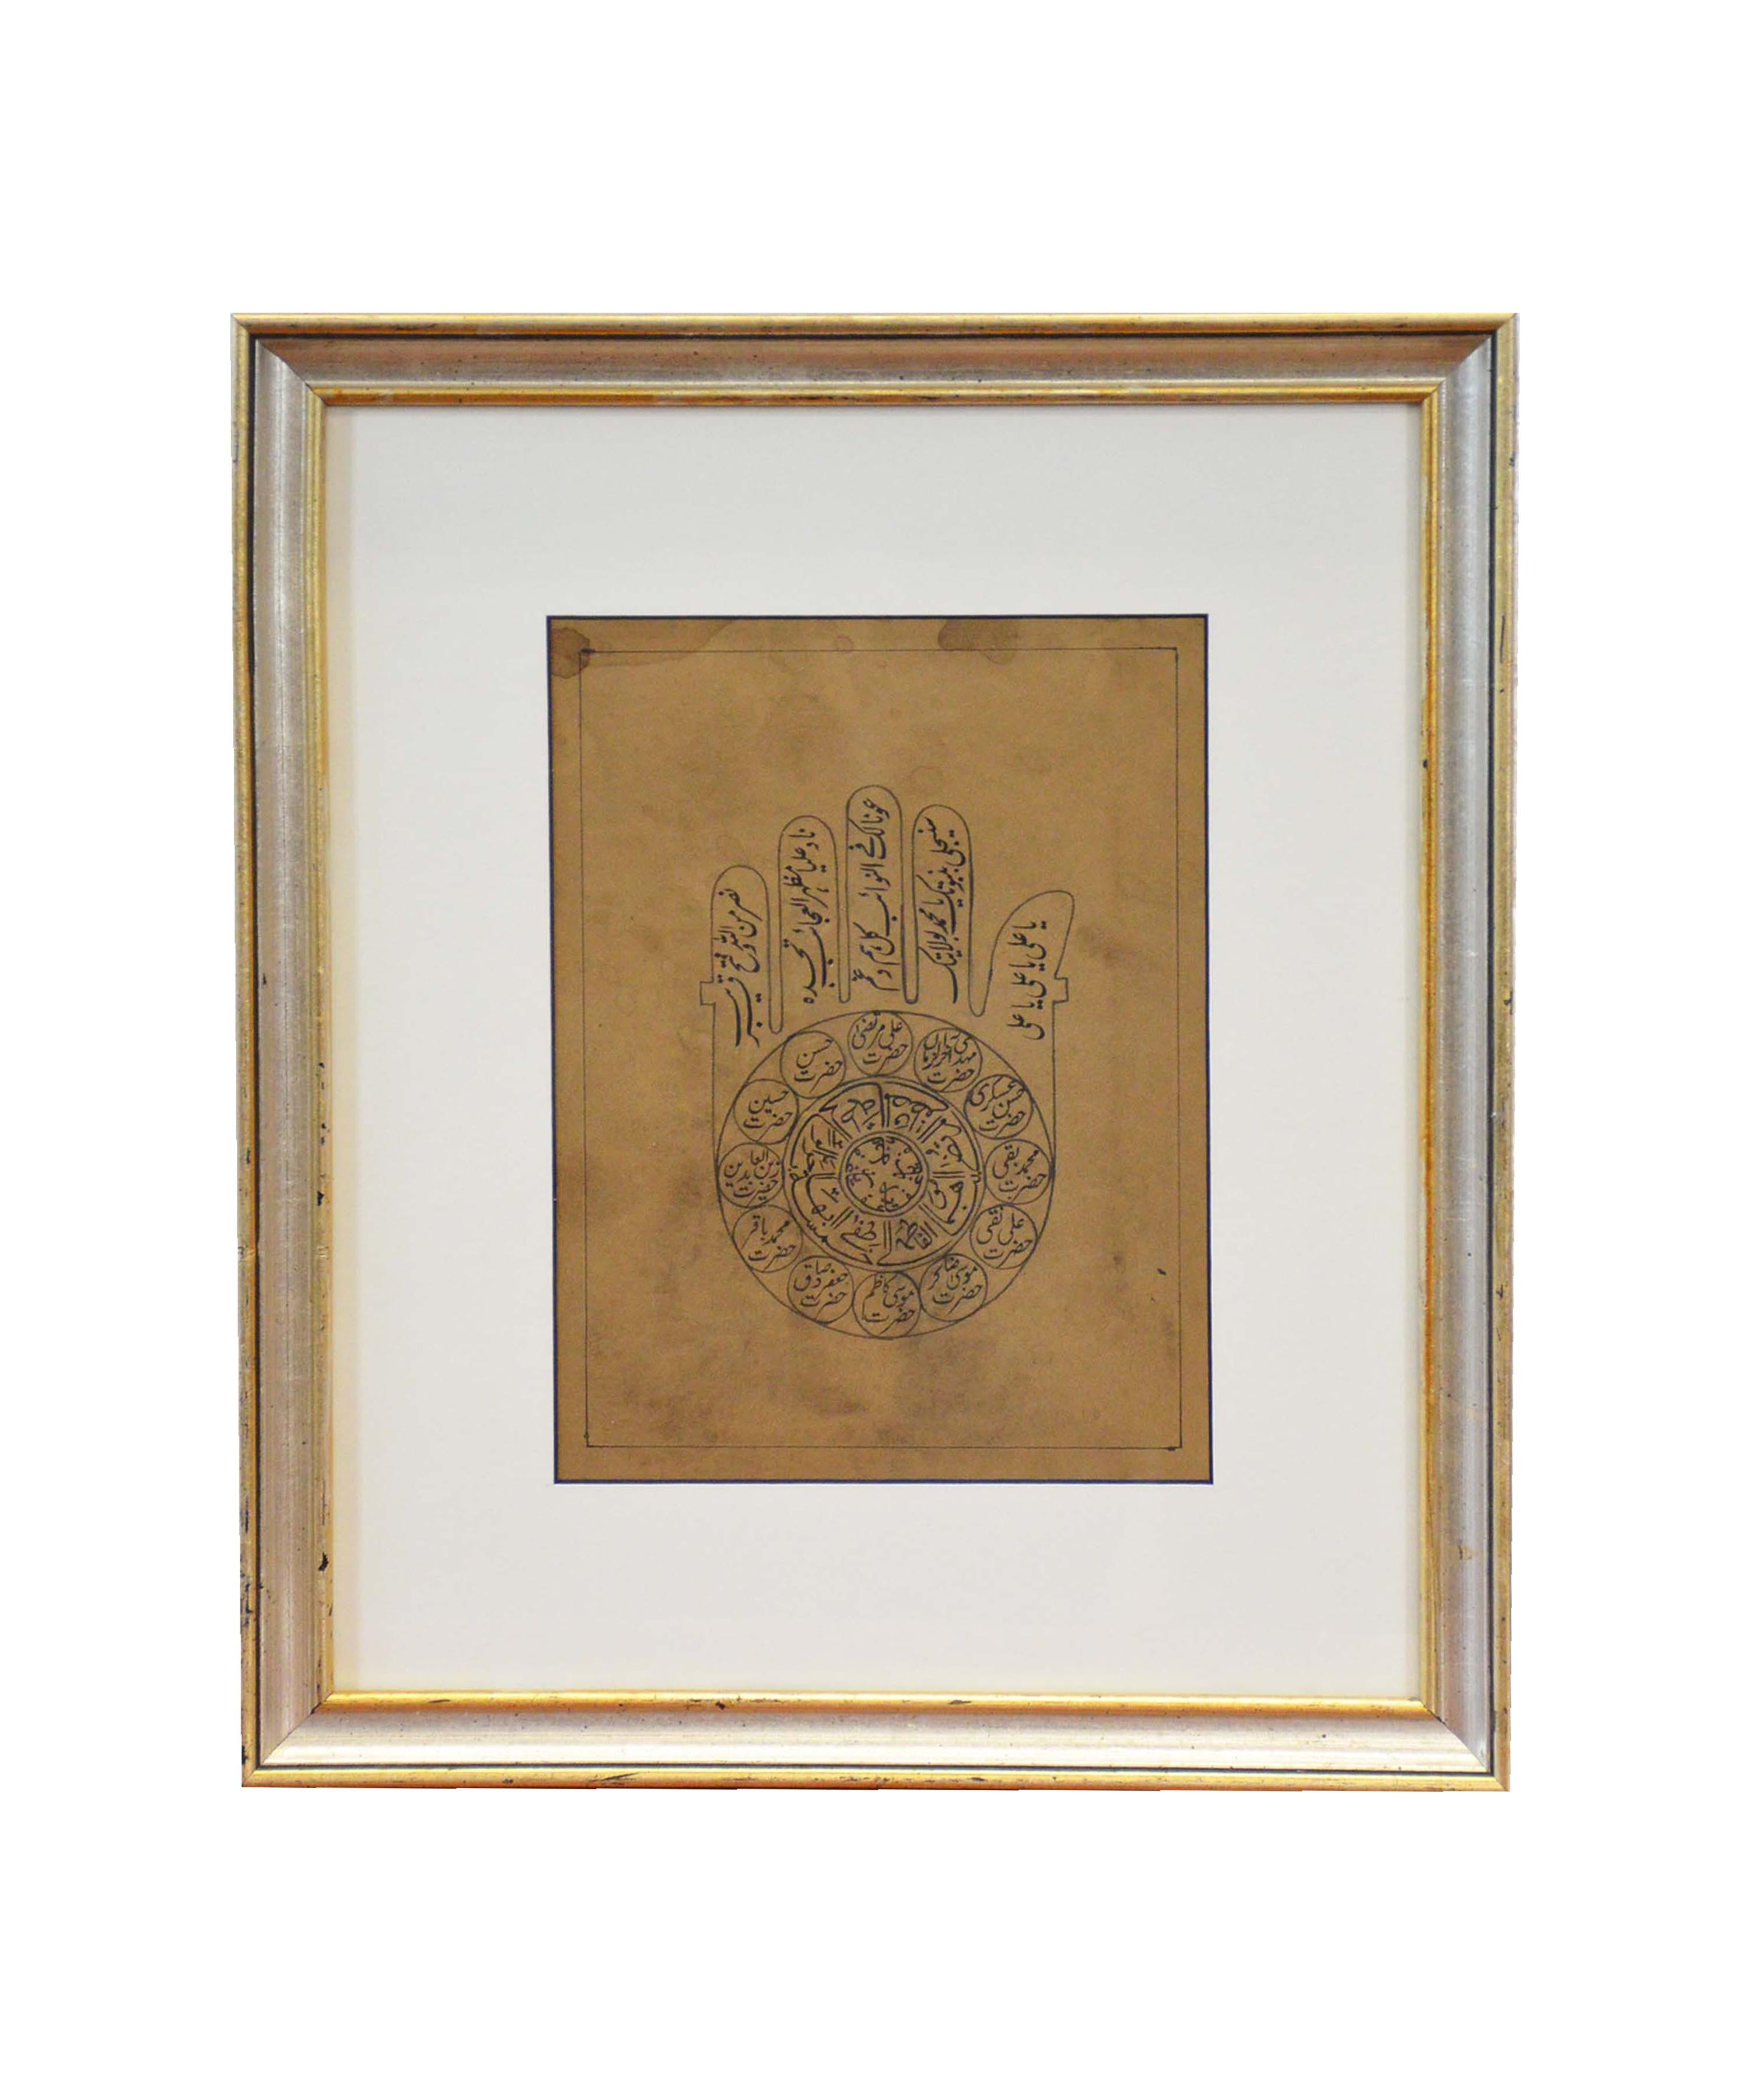 Astrological Hand-Painted on Parchment Print Depicting a Hand with Calligraphy For Sale 4